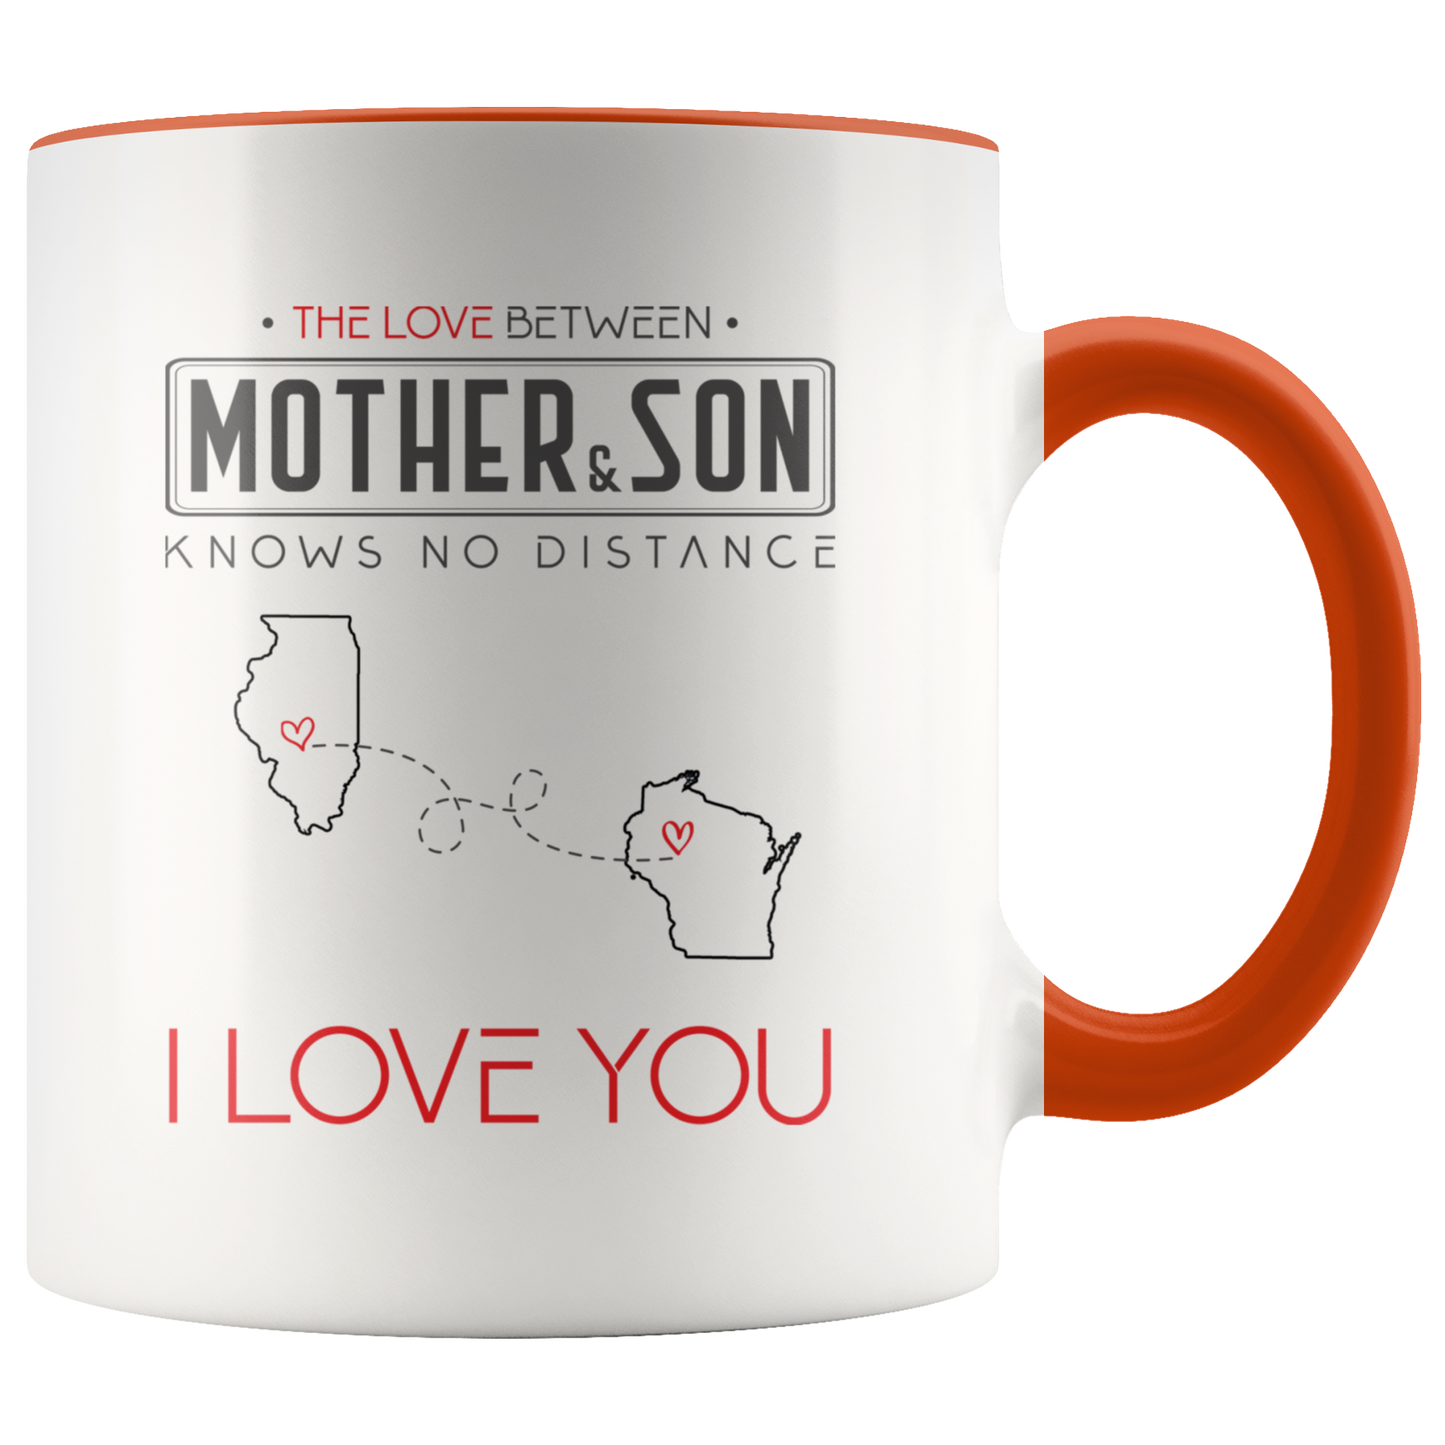 ND-21315357-sp-23273 - Mom And Son Accent Mug 11 oz Red - The Love Between Mother A